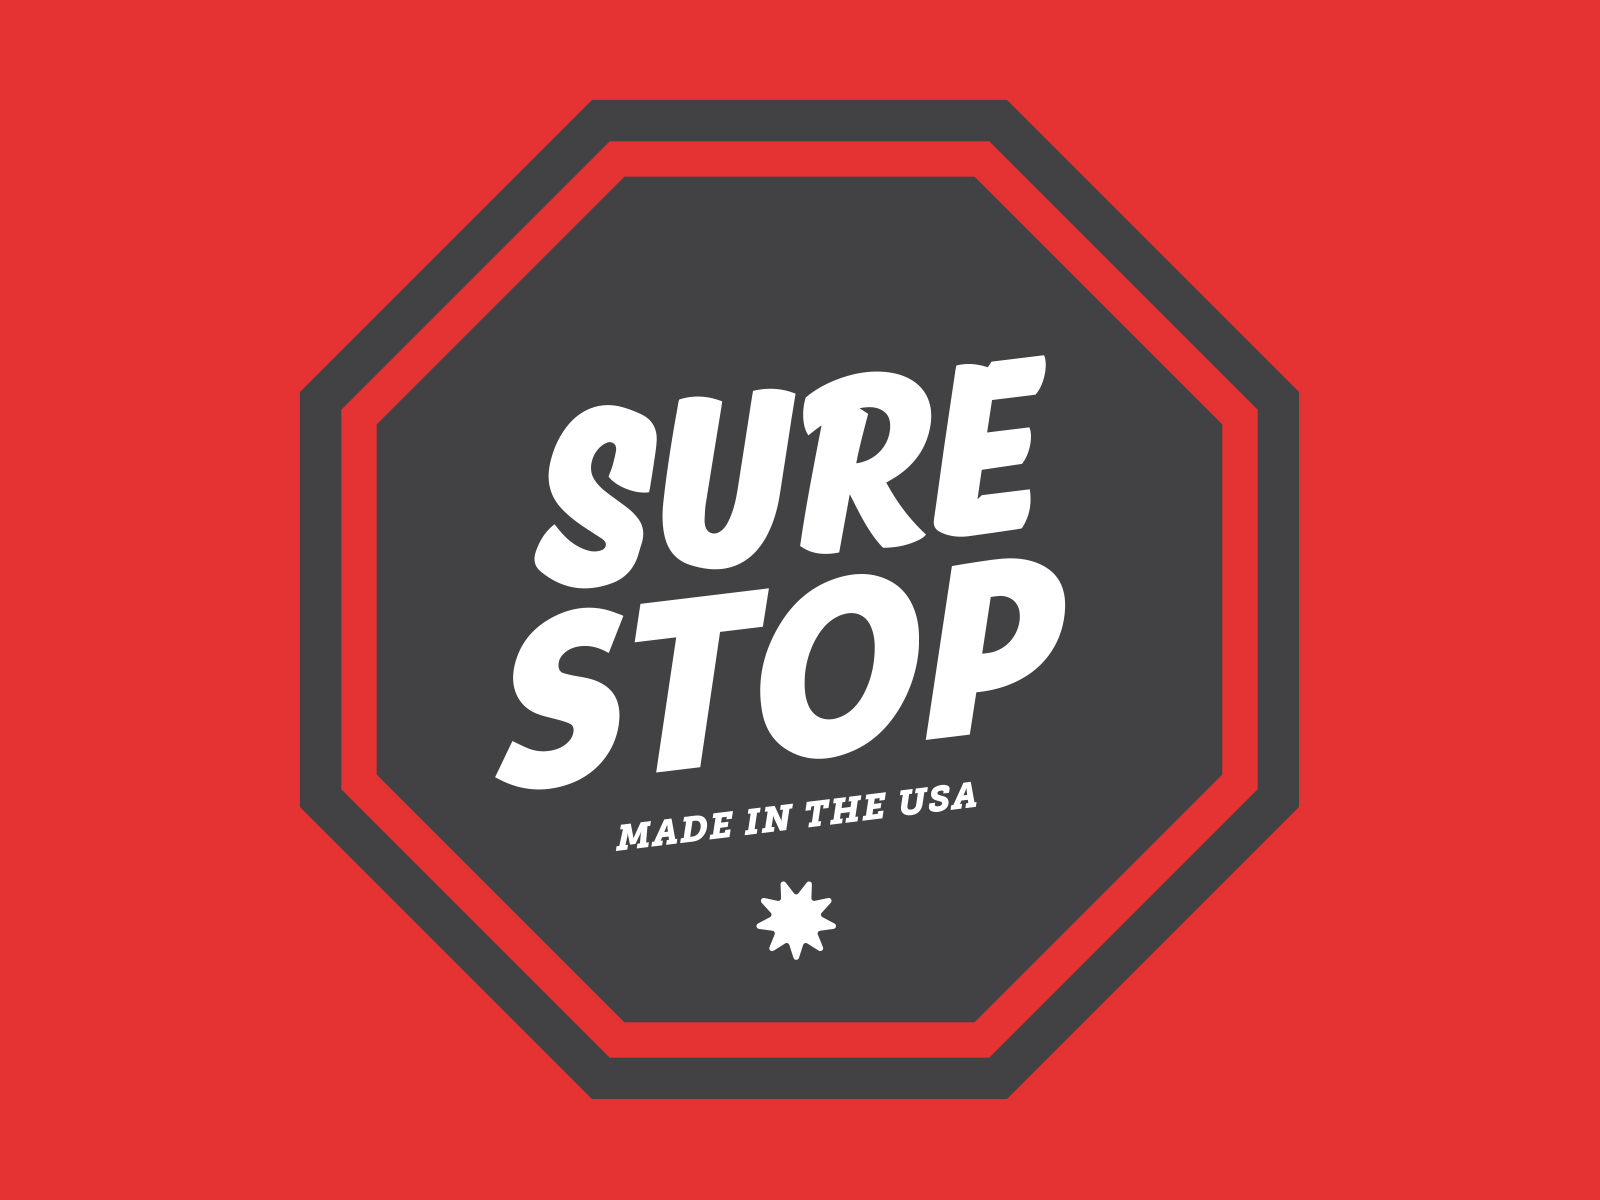 Sure Stop - logo comps comps had illustration illustrations lights logos red schools sign signage stop sure usa whistle